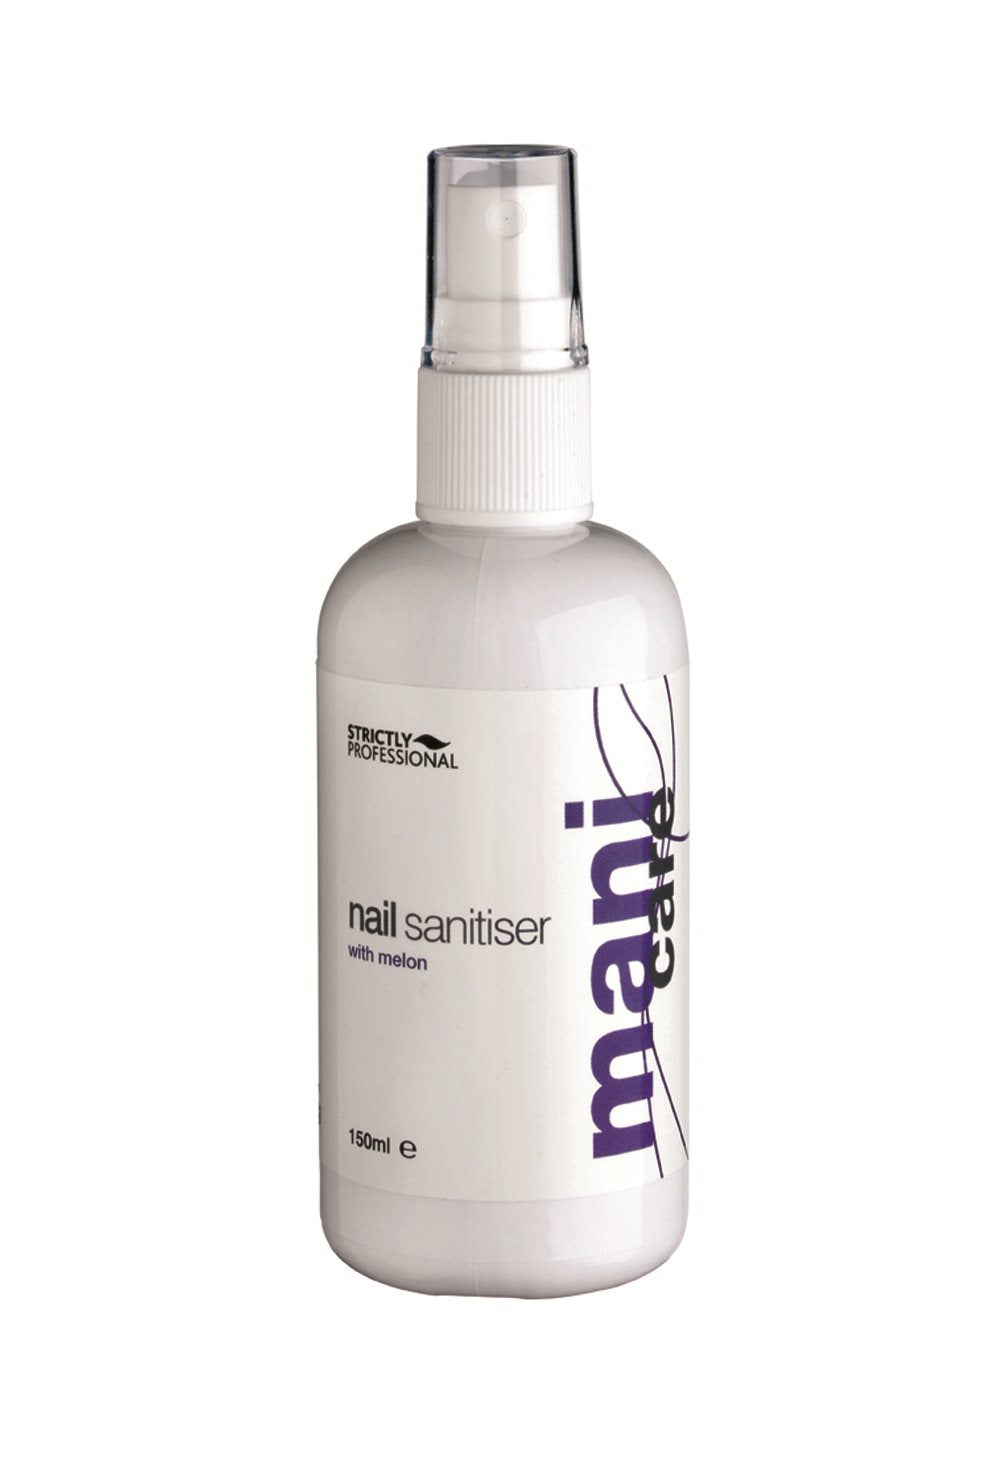 Strictly professional nail sanitiser with melon 150ml